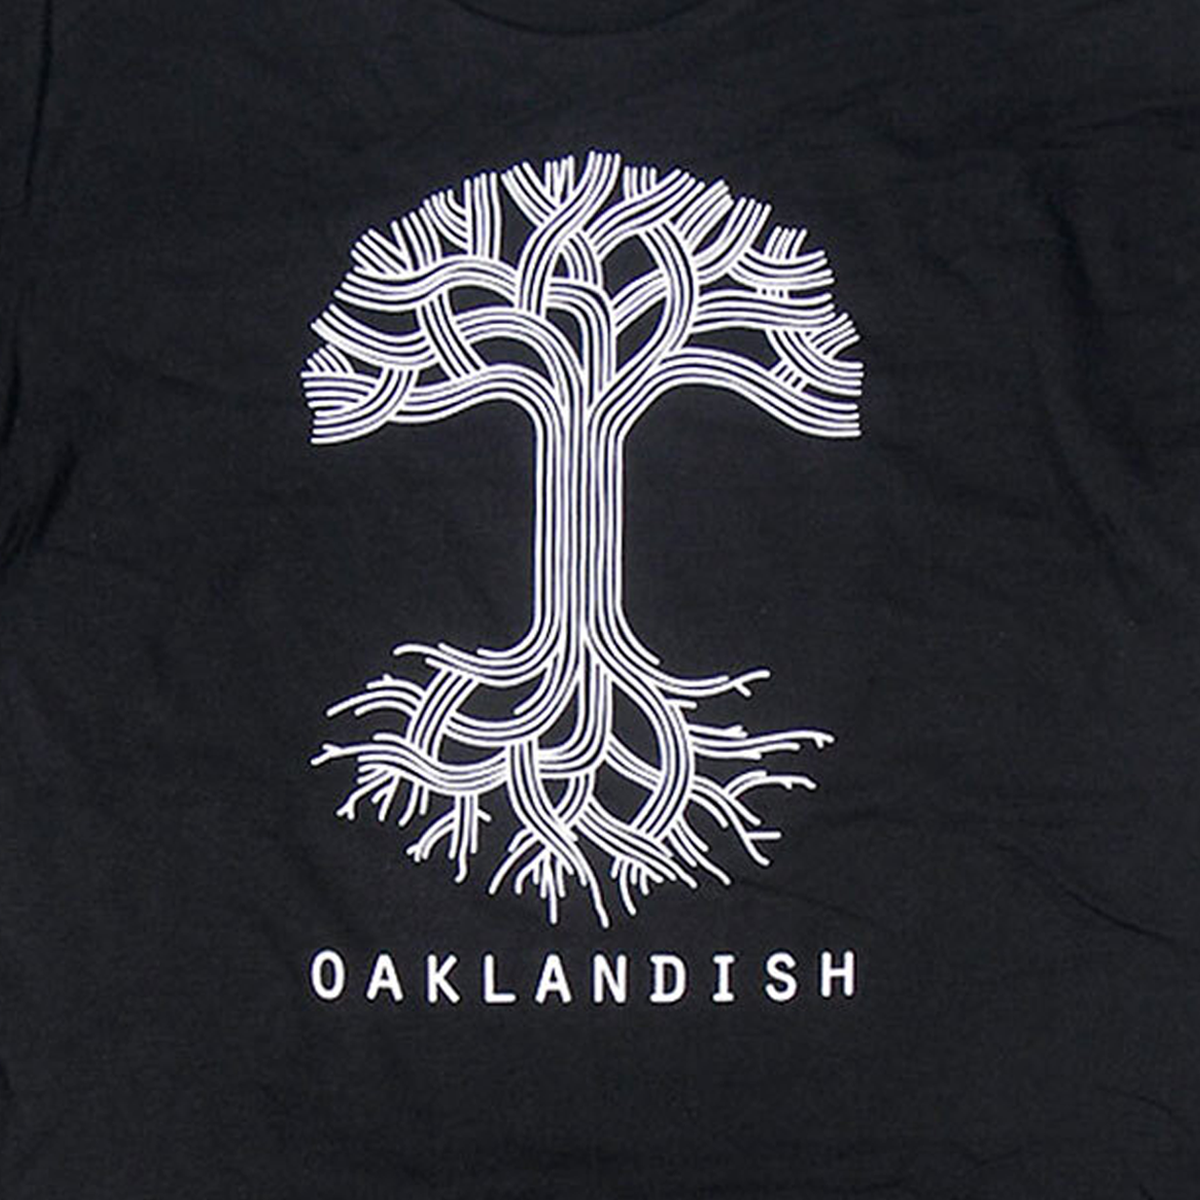 Close-up of large white Oaklandish tree logo and wordmark on the front chest of a black t-shirt.